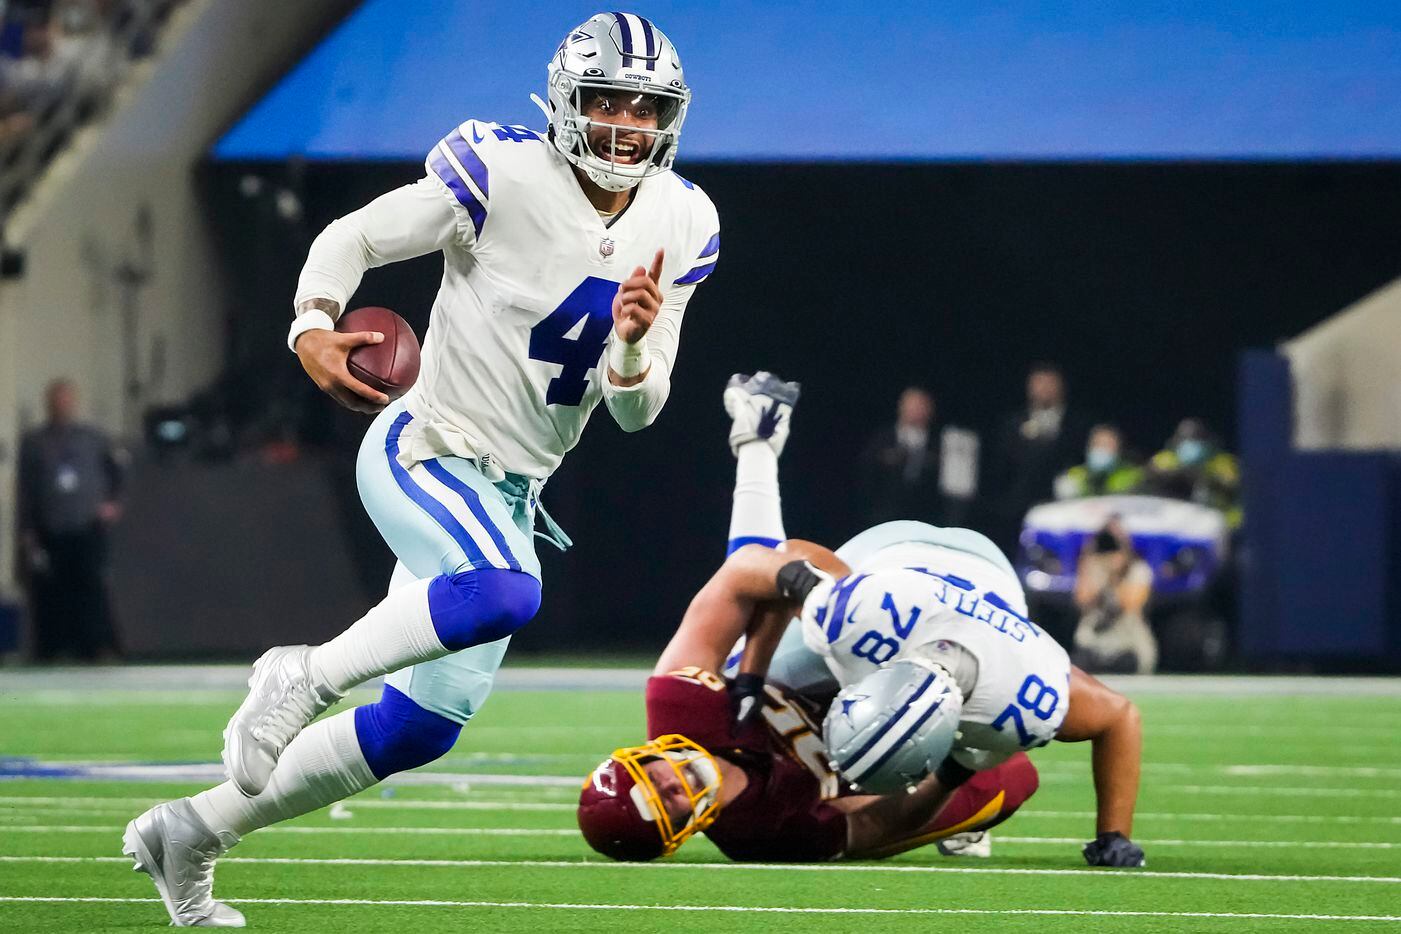 Dallas Cowboys quarterback Dak Prescott (4) gets a block from offensive tackle Terence Steele (78) as he scrambles for a first down during the first half of an NFL football game against the Washington Football Team at AT&T Stadium on Sunday, Dec. 26, 2021, in Arlington.